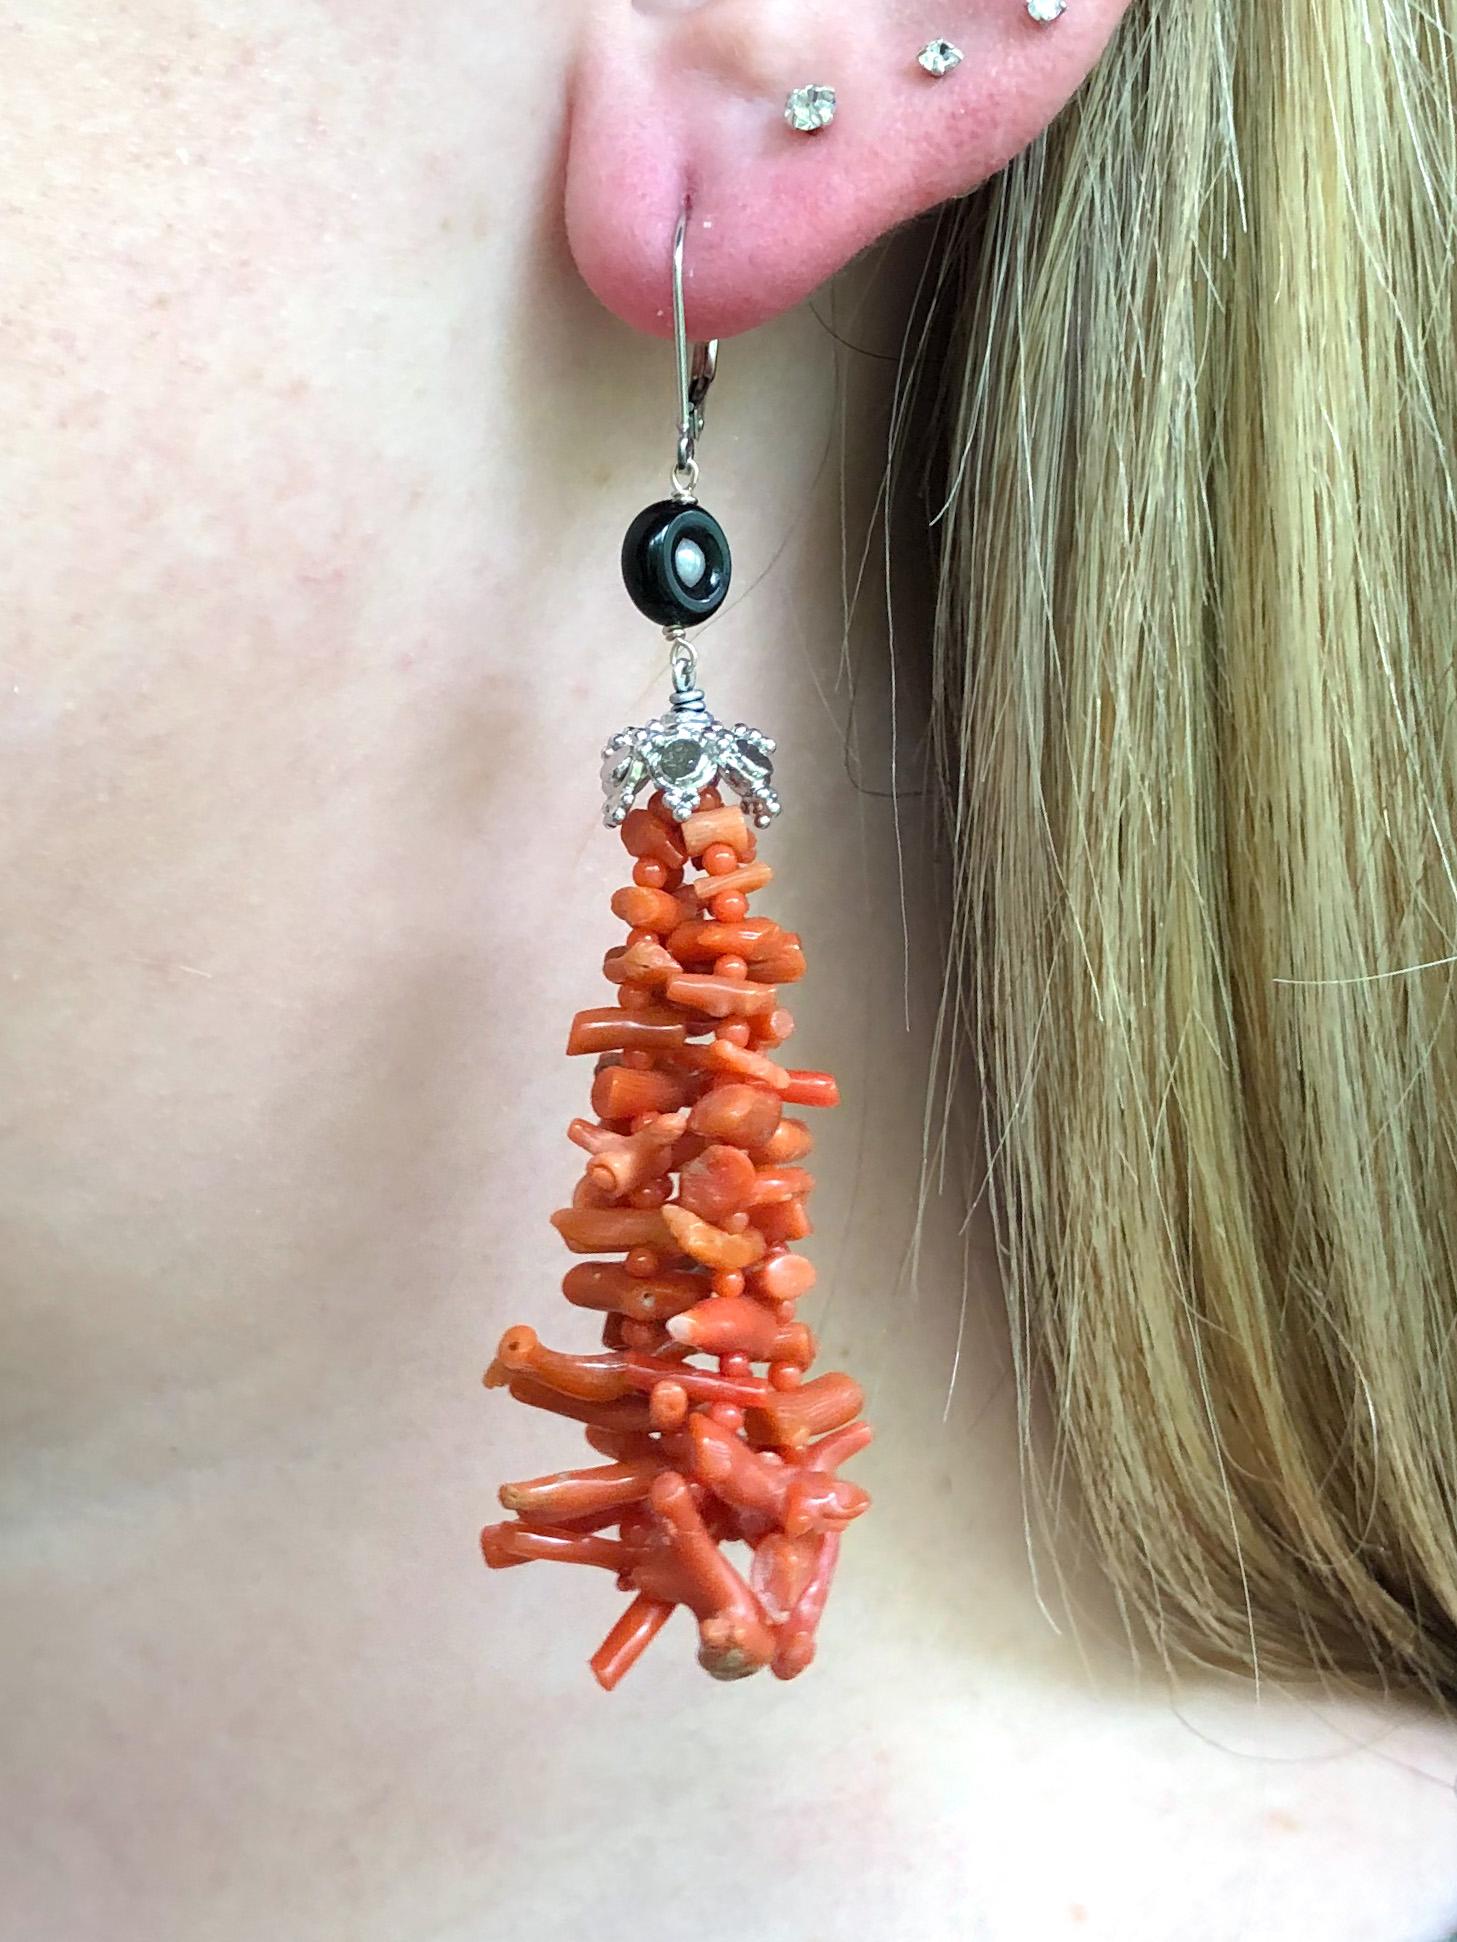 Brilliant Cut Marina J. Coral Tassel Earrings with Black Onyx and Pearl and 14k White Gold